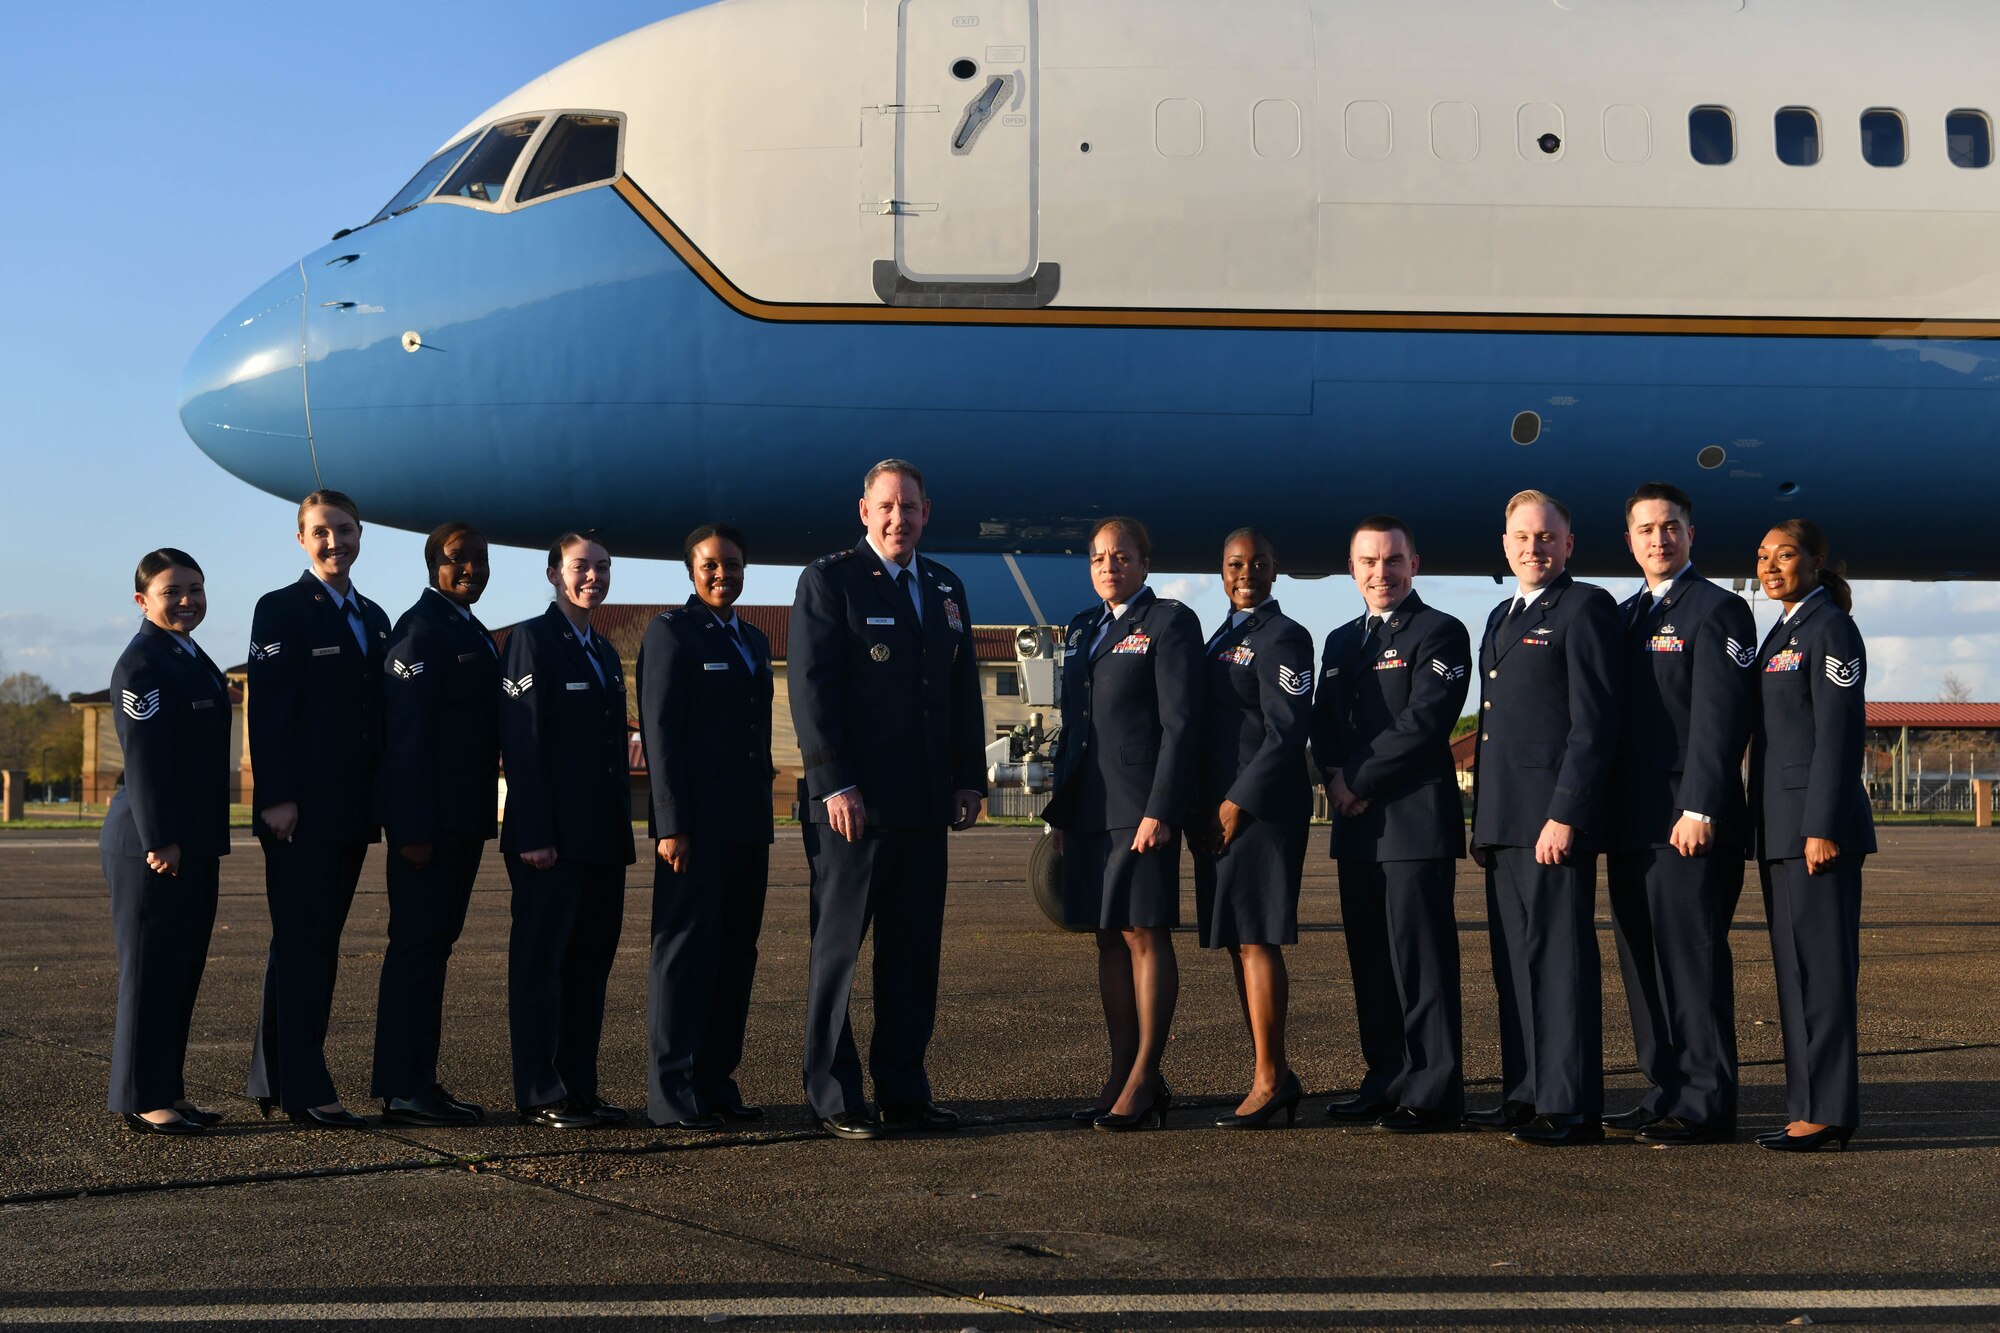 Lt. Gen. James Hecker, Air University commander and president, and Col. Eries Mentzer, 42nd Air Base Wing commander, pose for a photo with Maxwell-Gunter Airmen prior to the vice president’s departure from Maxwell Air Force Base, Alabama, March 6, 2022. Vice President Kamala Harris recognized 10 individuals who were nominated as exemplary Airmen. (U.S. Air Force photo by Senior Airman Jackson Manske